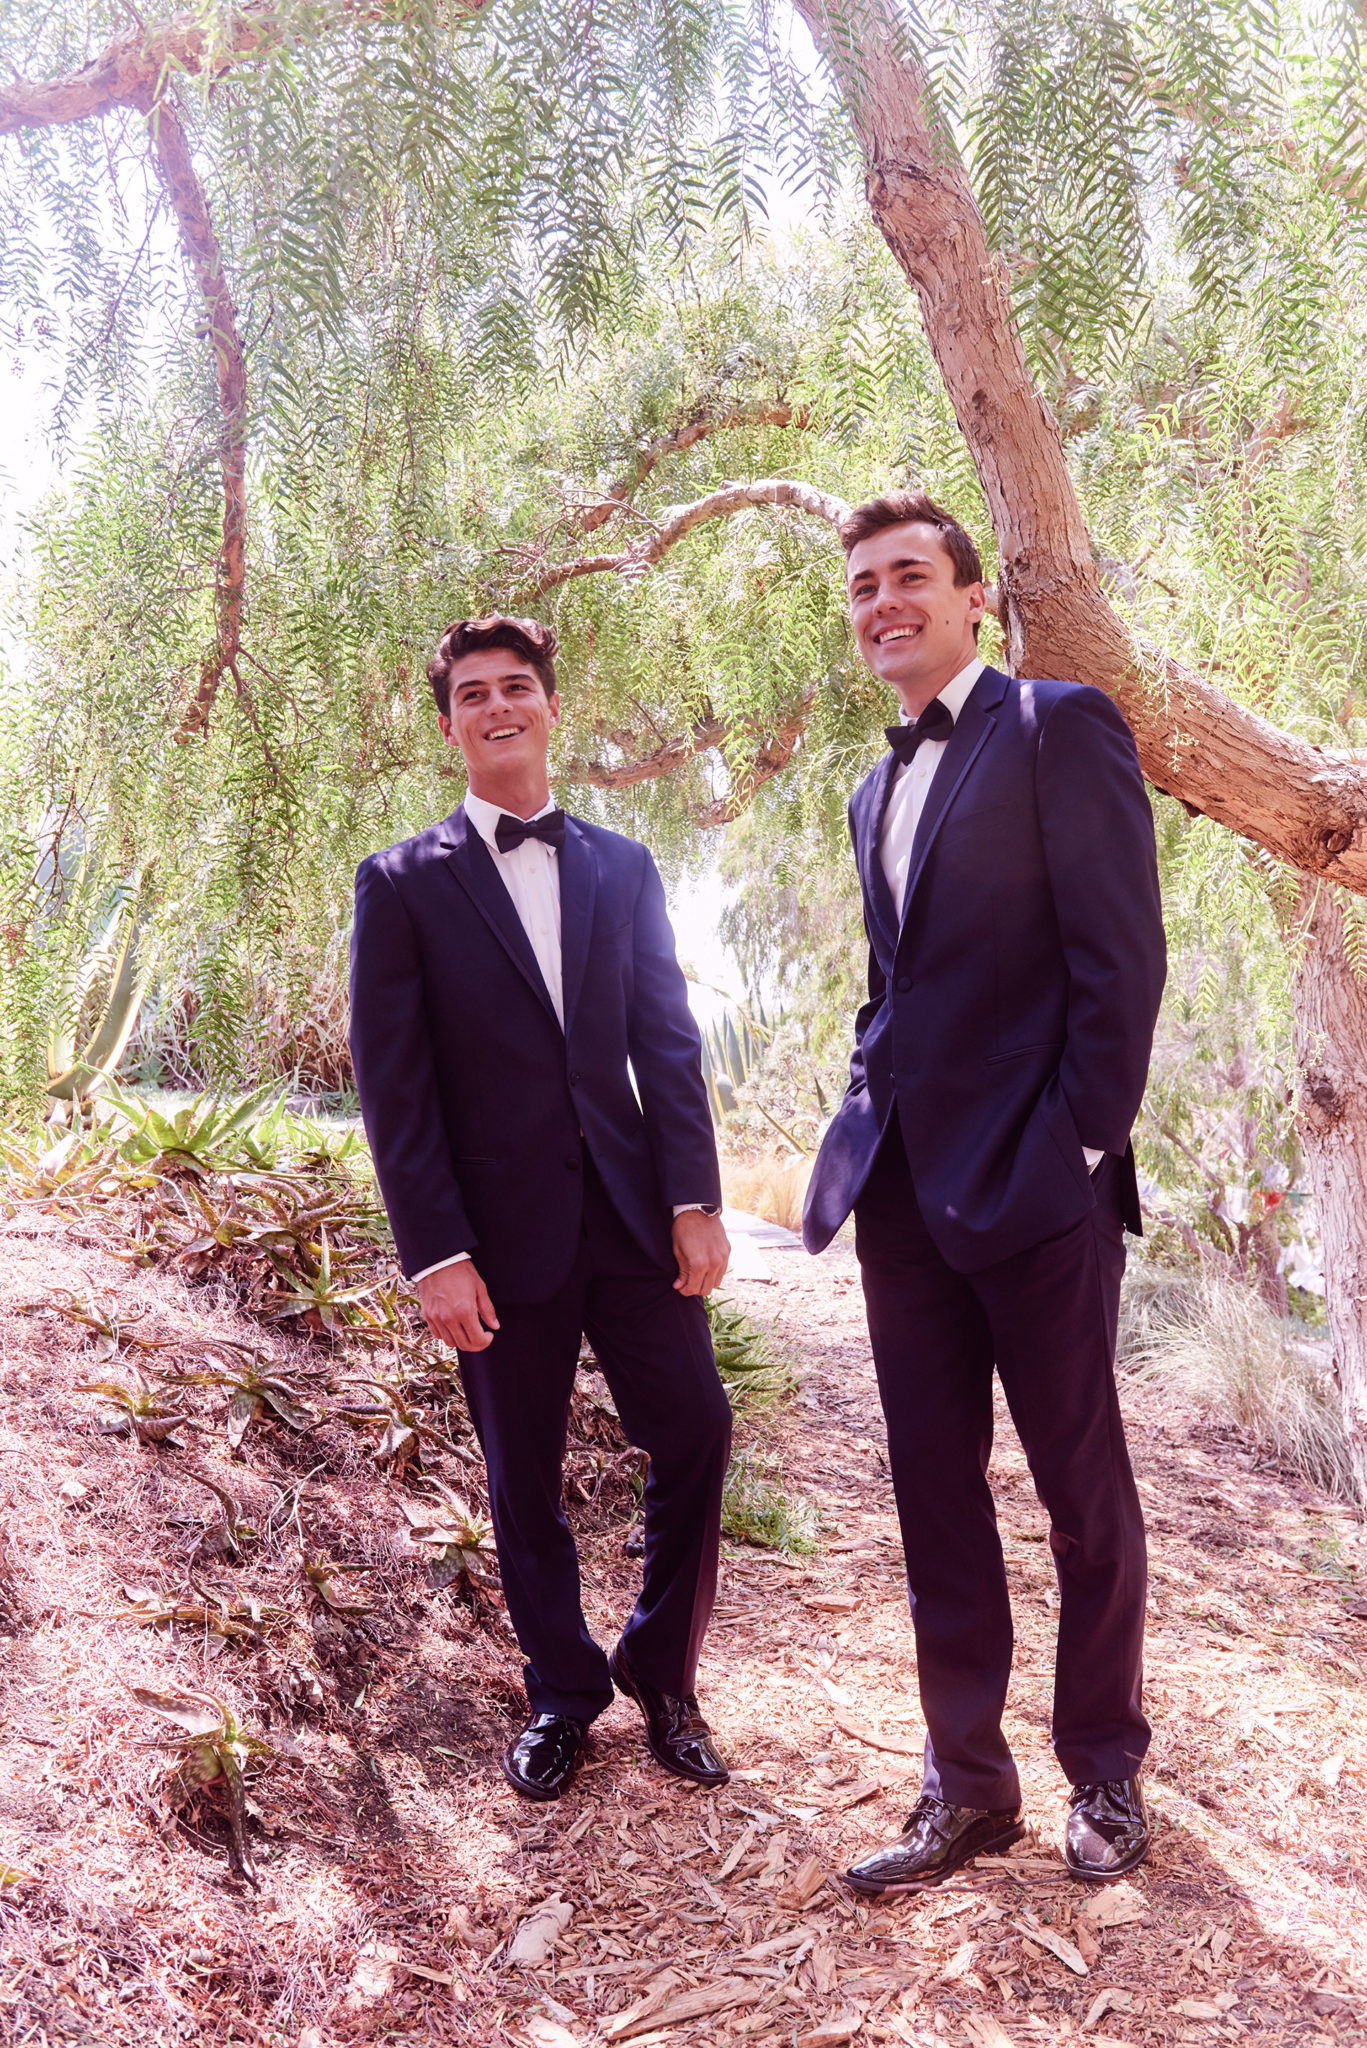 Two groomsmen in tuxedos in an outdoor setting